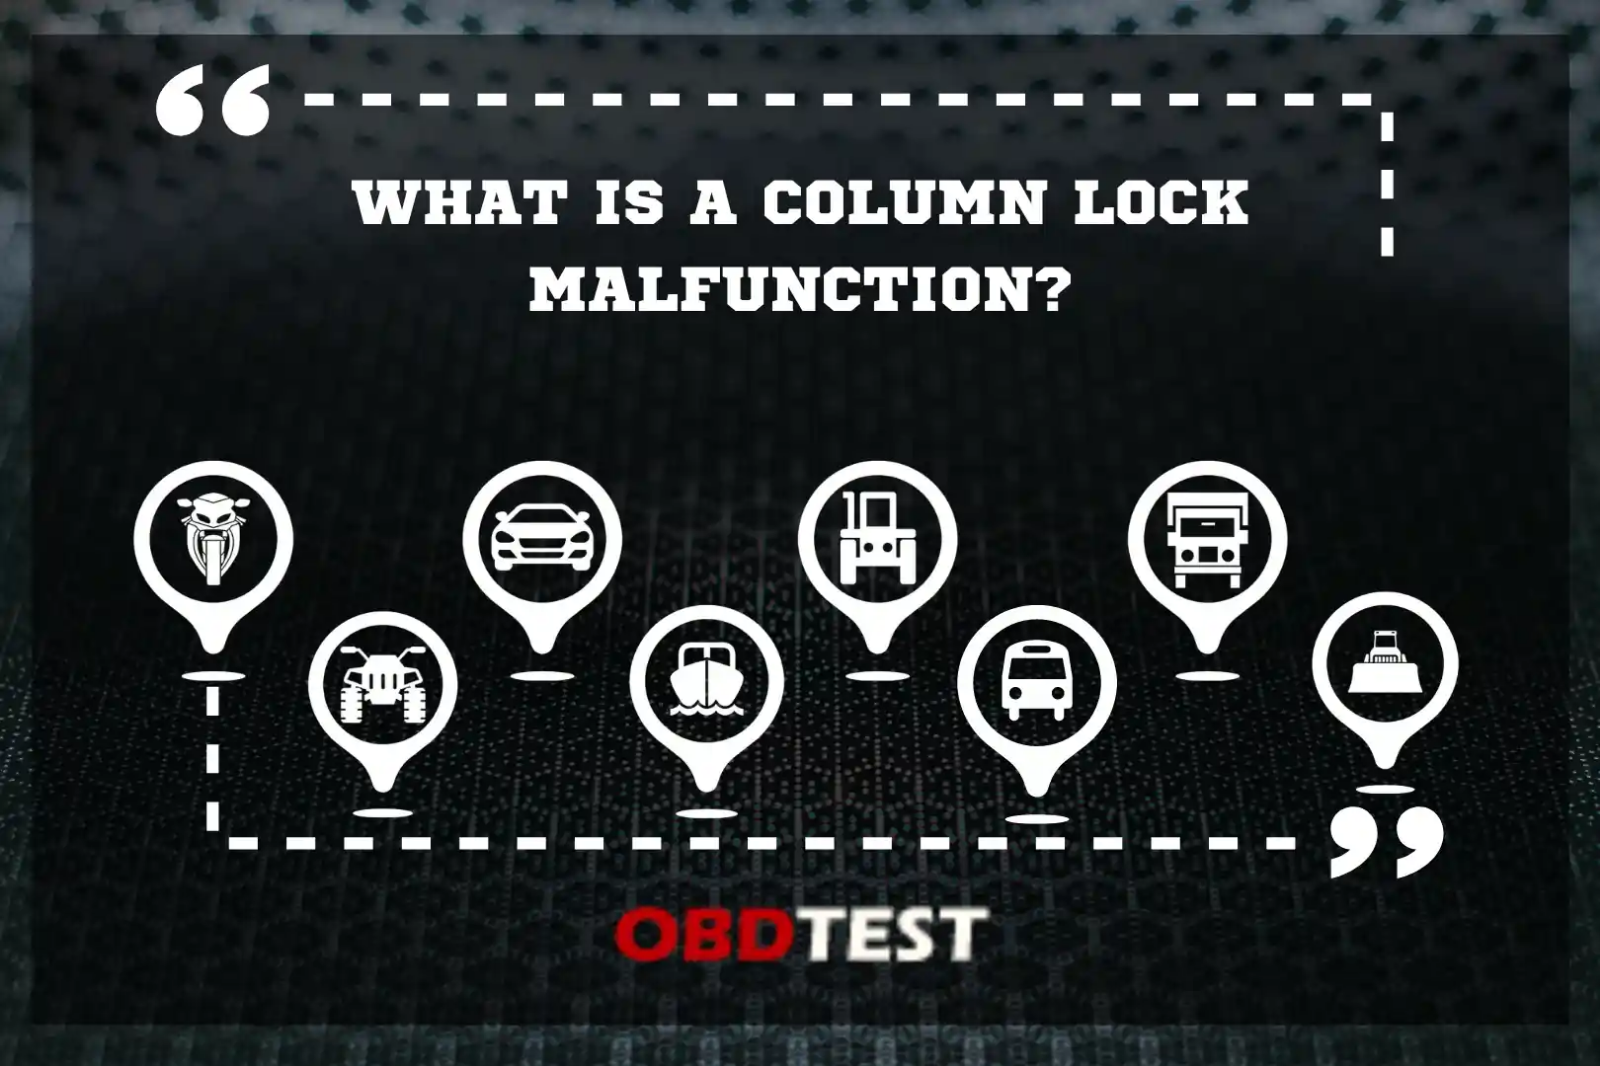 What is a column lock malfunction?